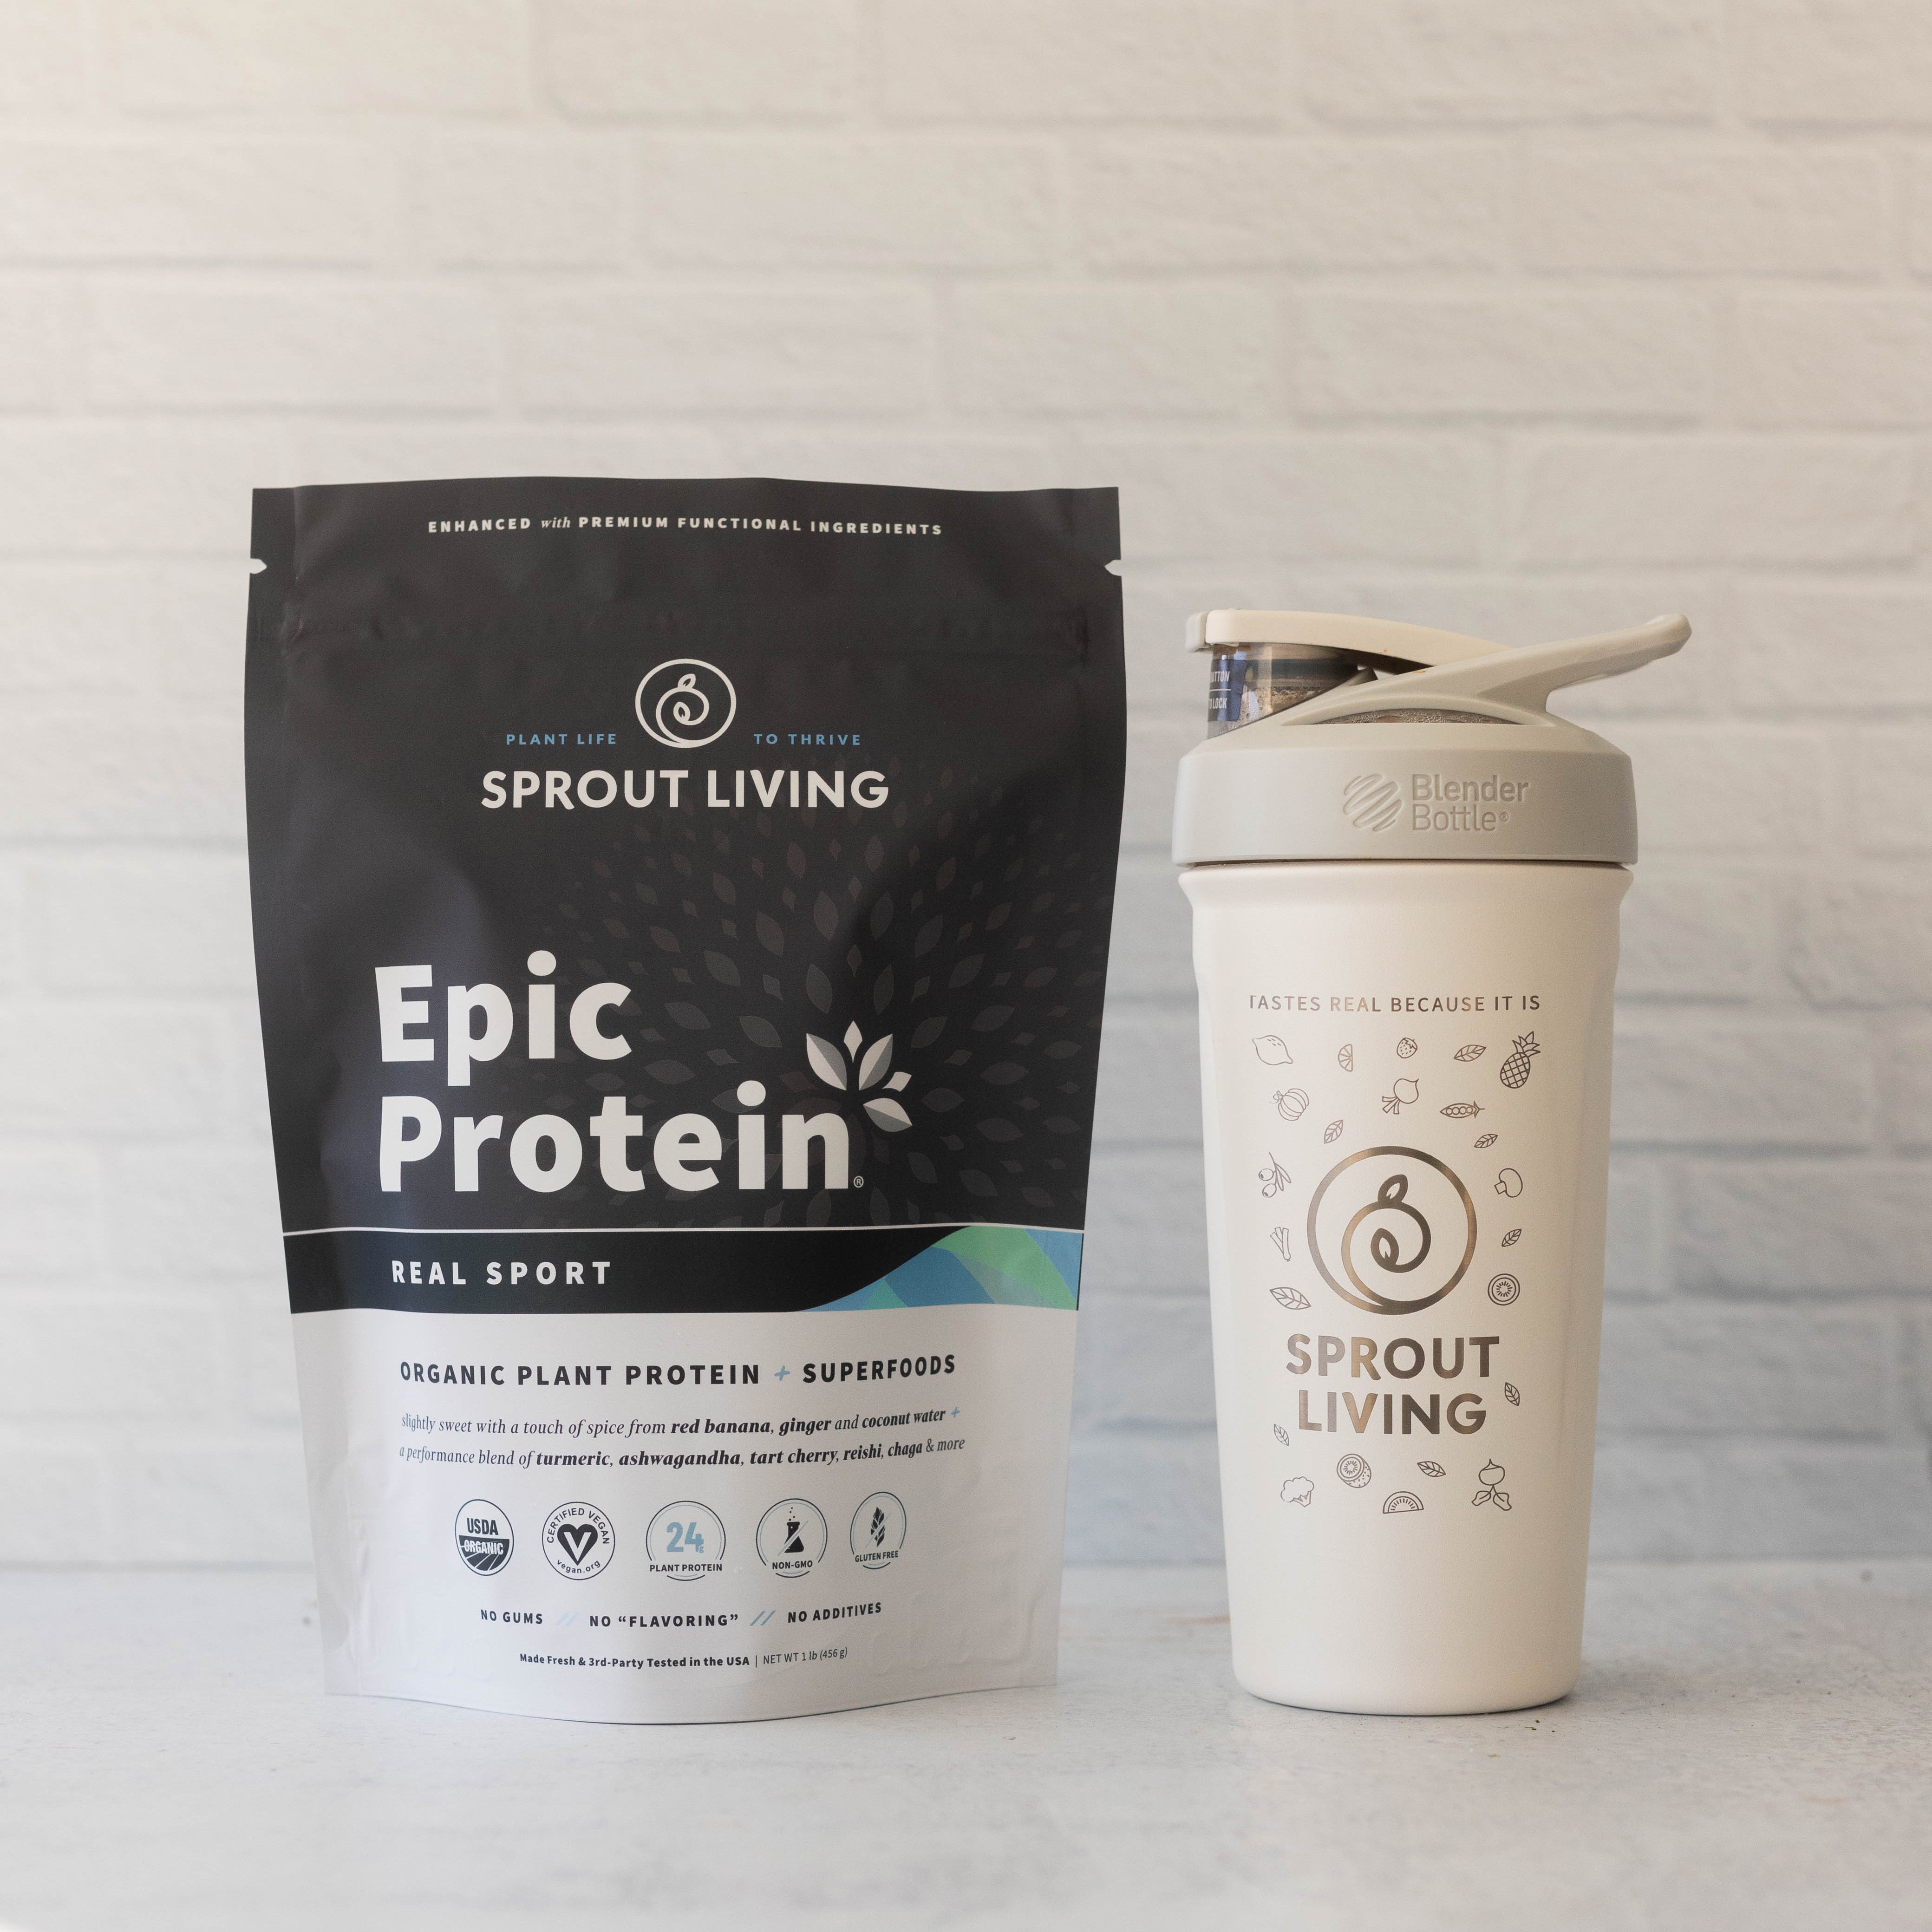 Epic Protein Real Sport and Sprout Living Shaker